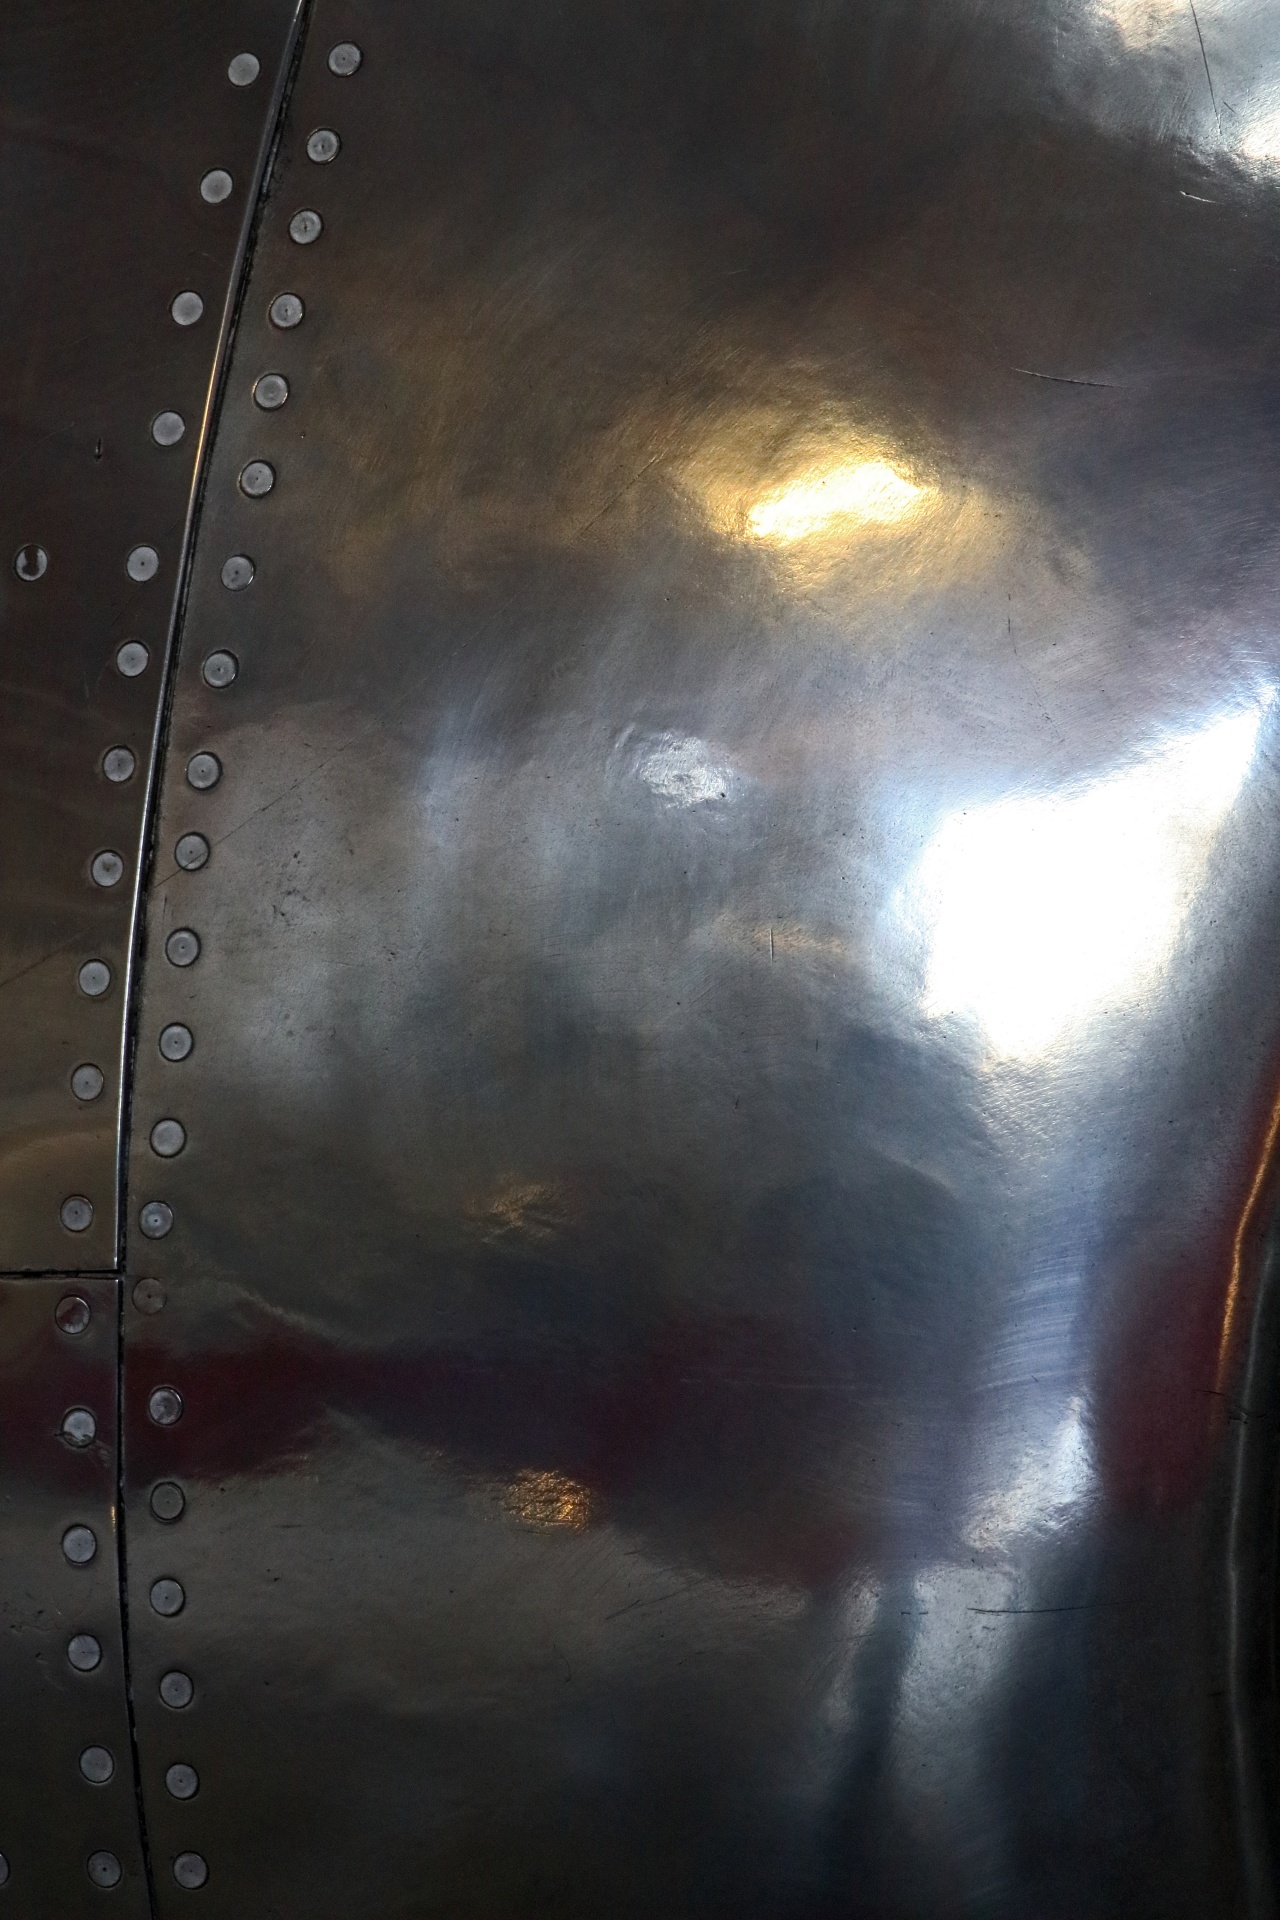 Polished Metal Cowling Of Aircraft